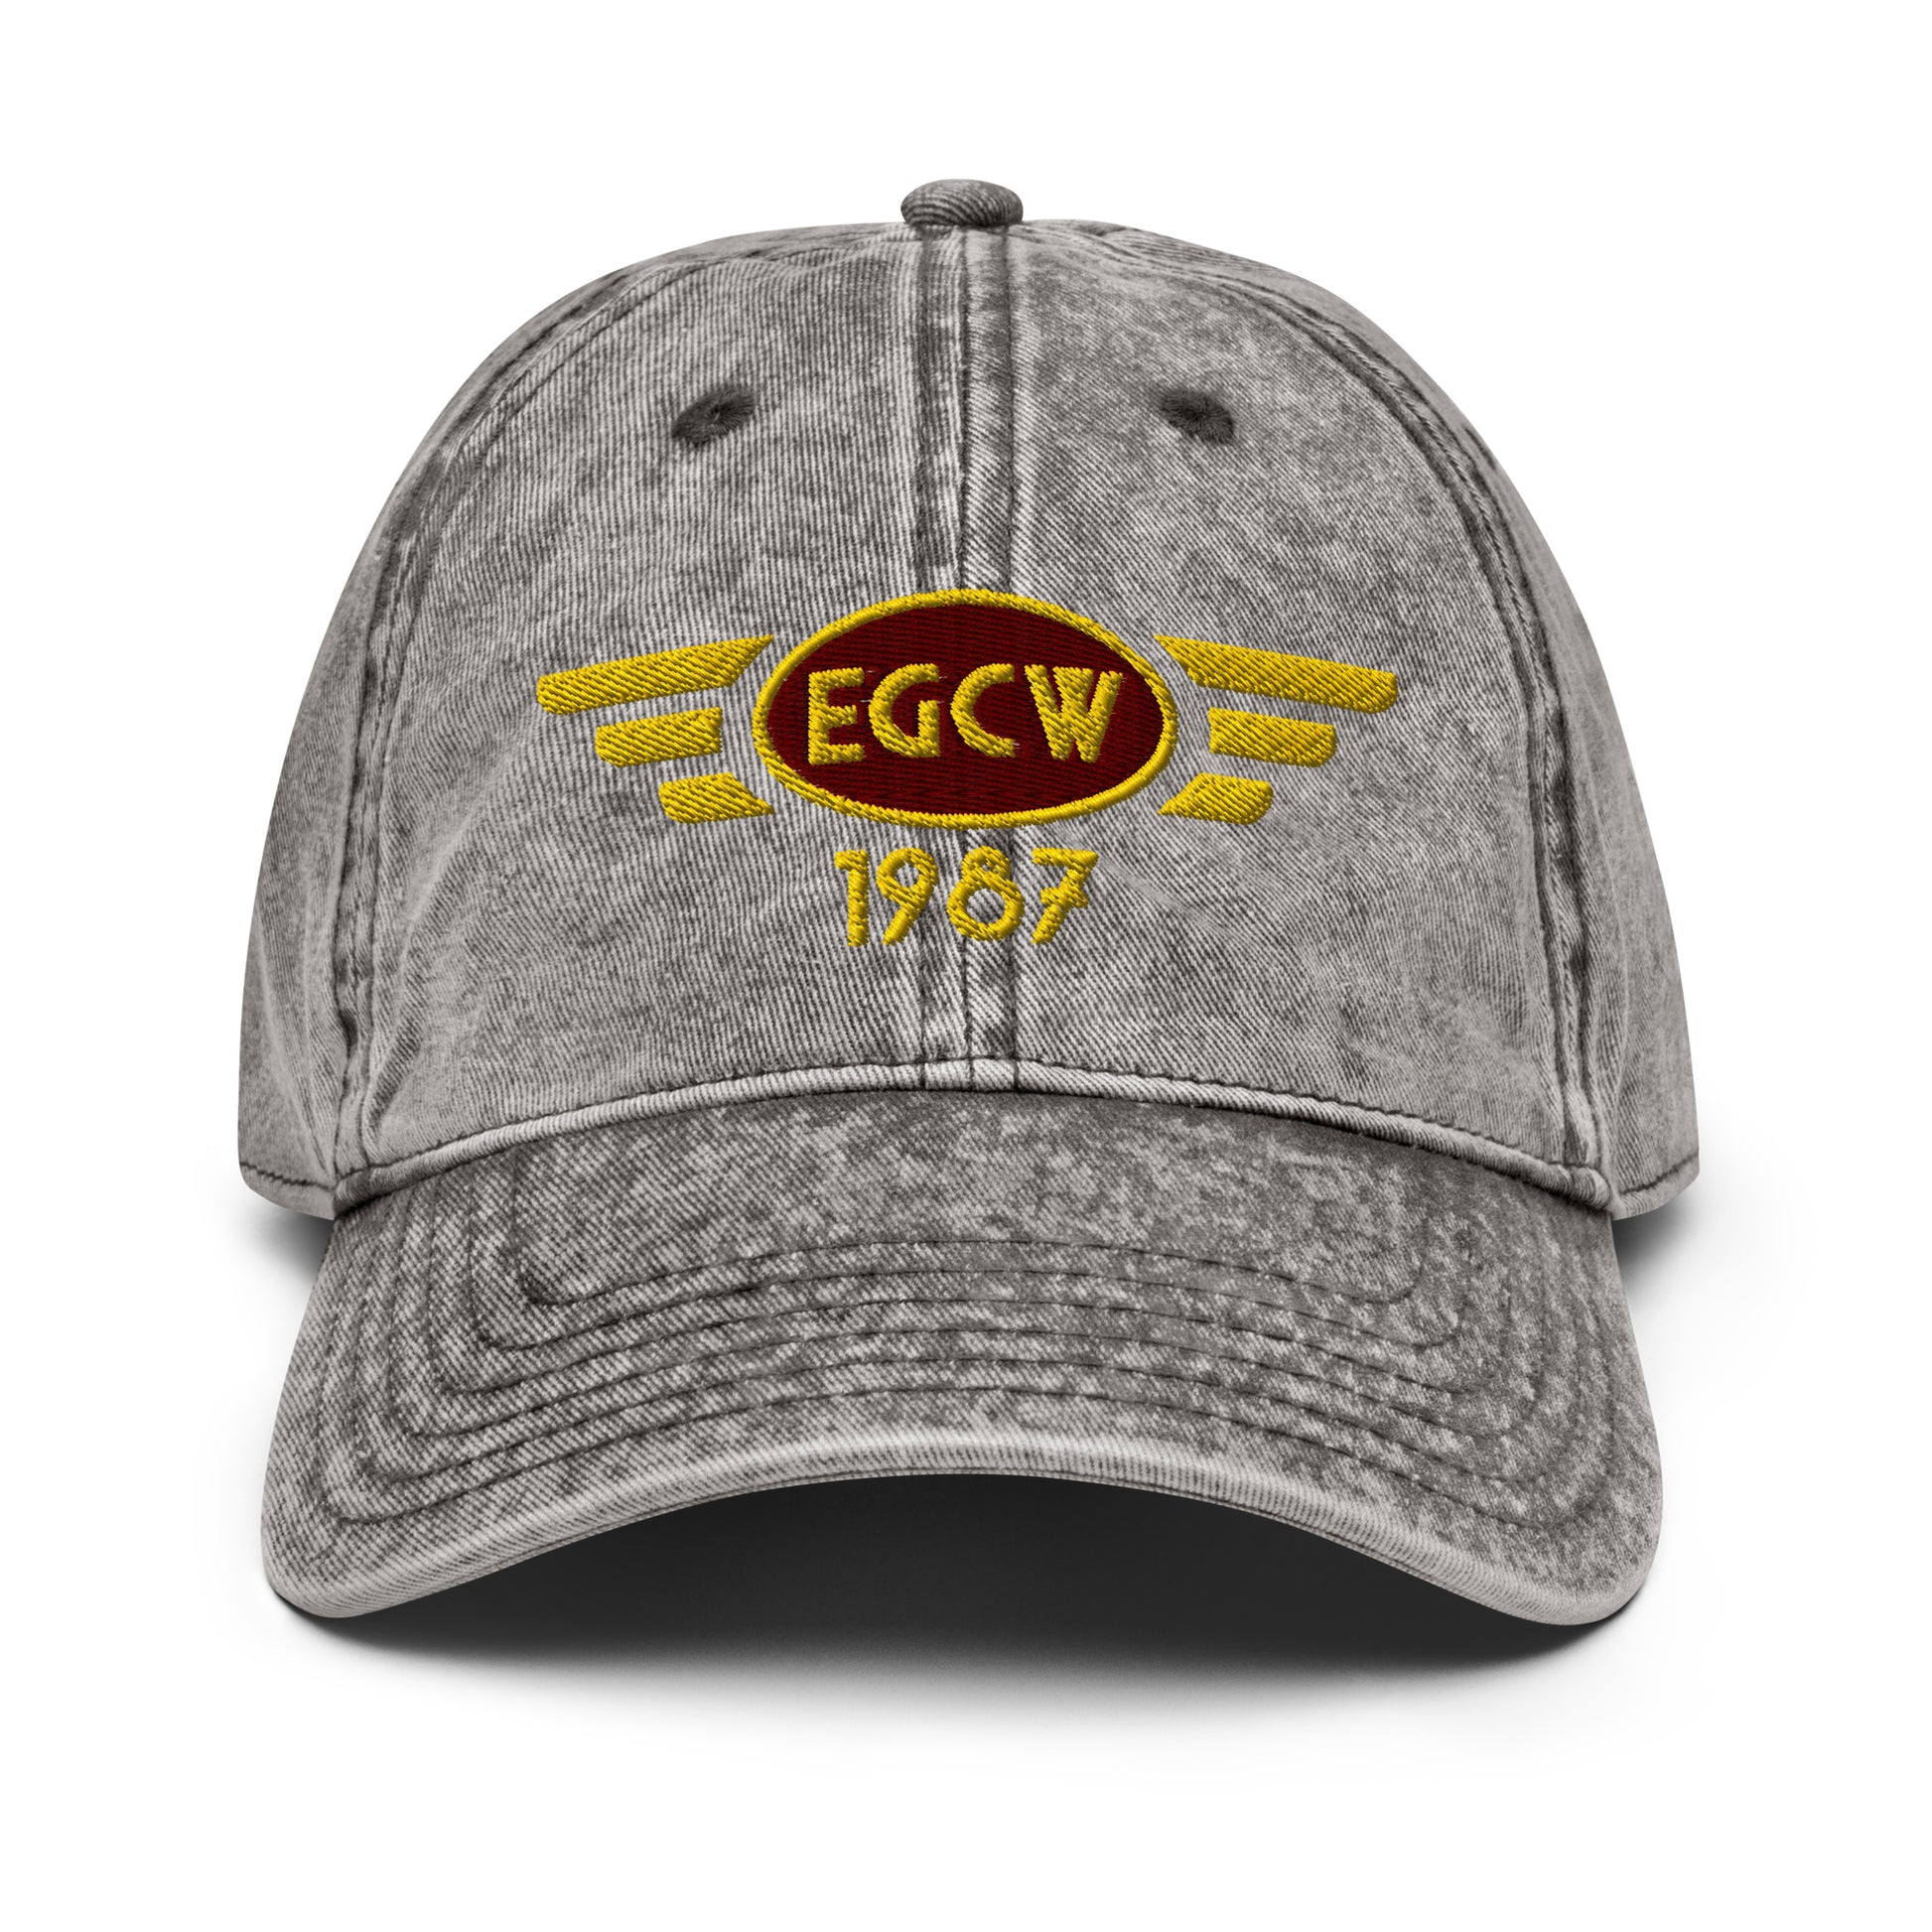 Charcoal gray coloured cotton twill baseball cap with embroidered vintage style aviation logo for Welshpool Airport.